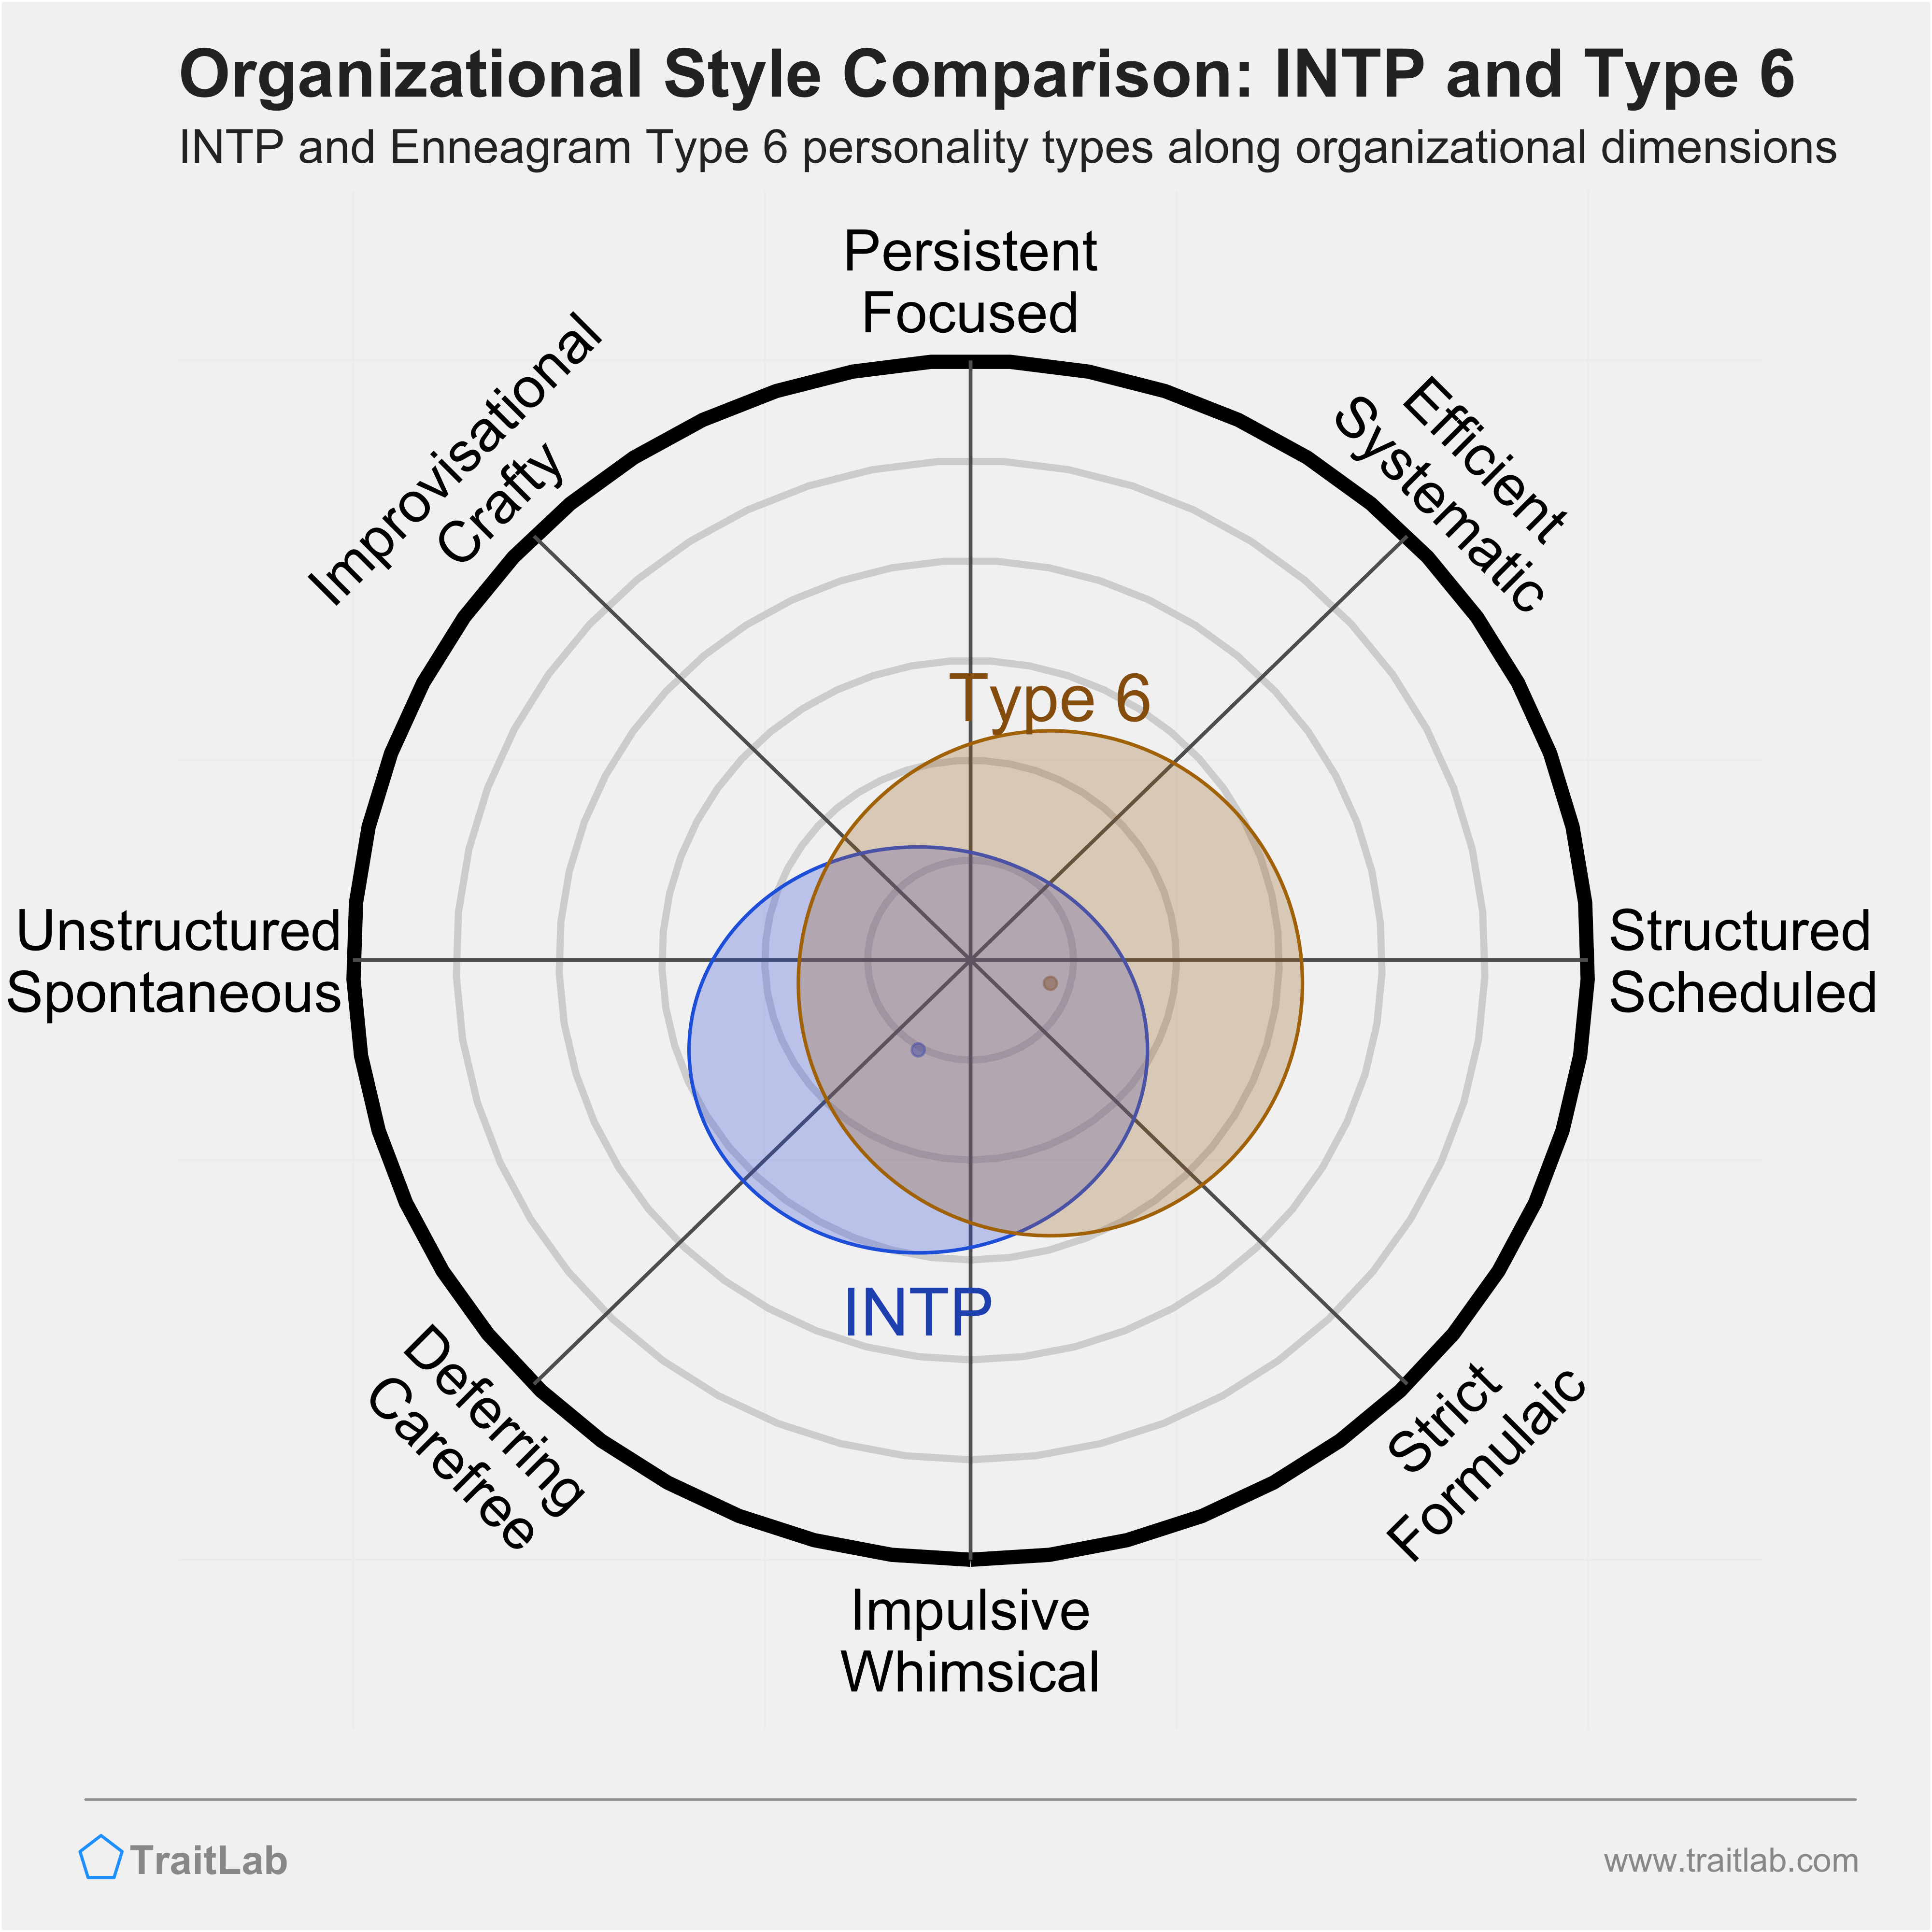 INTP and Type 6 comparison across organizational dimensions